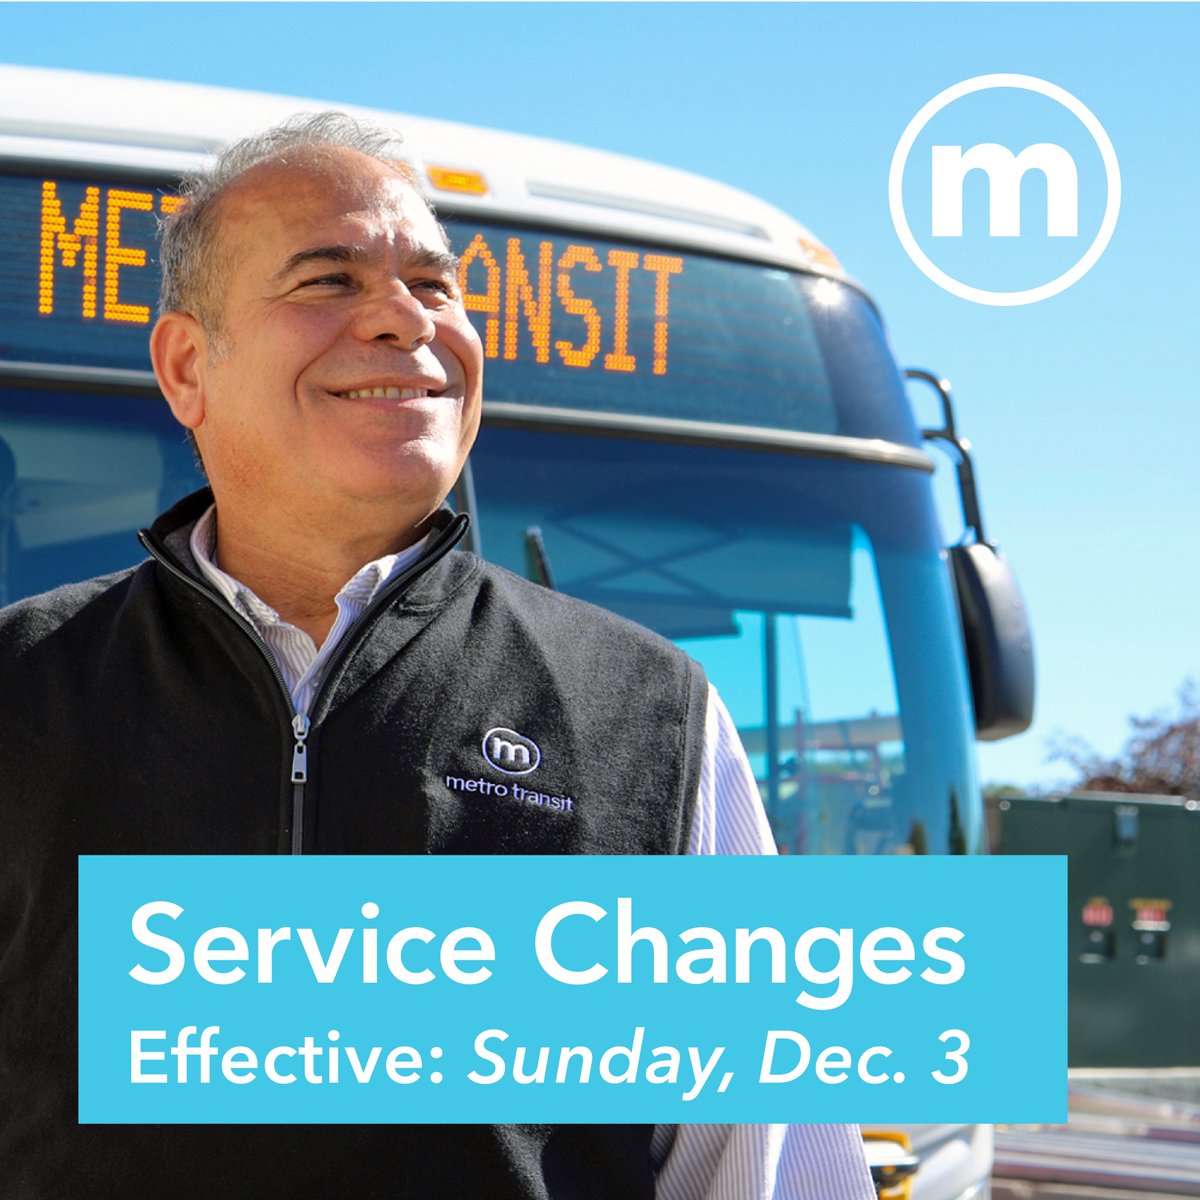 Upcoming Service Updates! To improve bus on-time performance and overall reliability, schedule adjustments will be made to most routes on Sunday, December 3. Adjustments may include trip times shifted earlier/later, timepoint changes & additional trips.